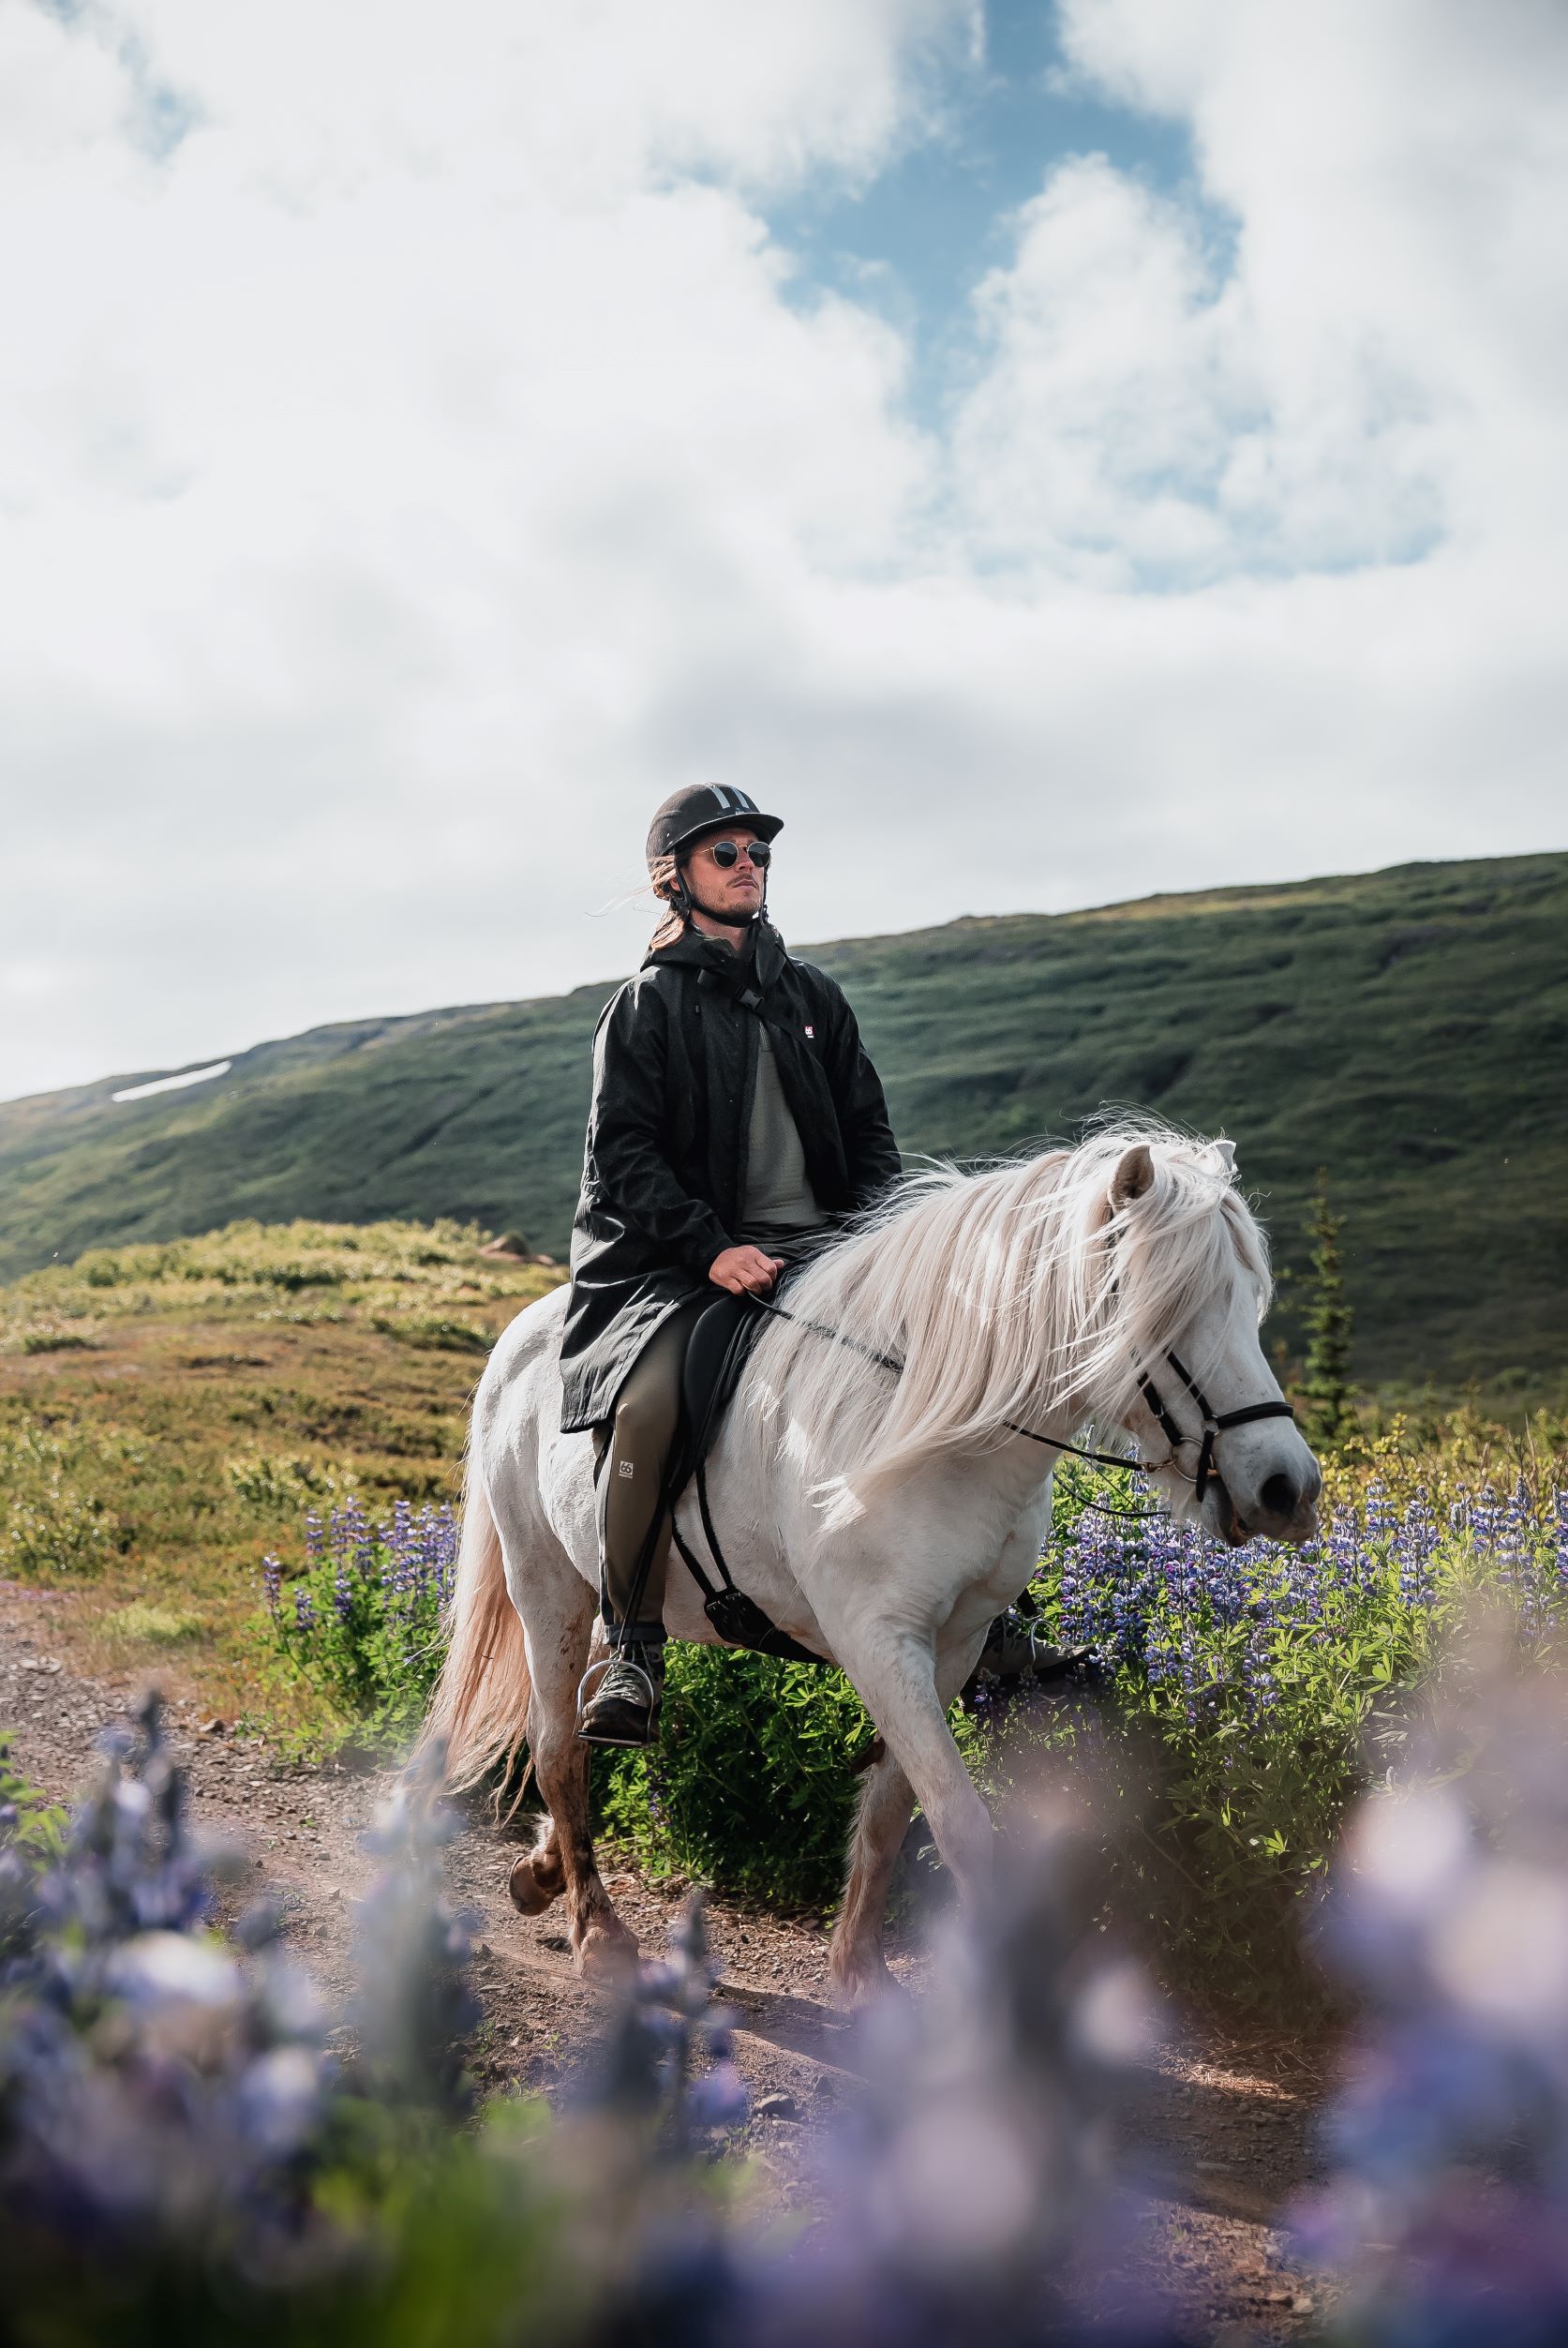 Rurik Gislason sits on a white Icelandic horse, riding a trail with lupin flowers in the foreground